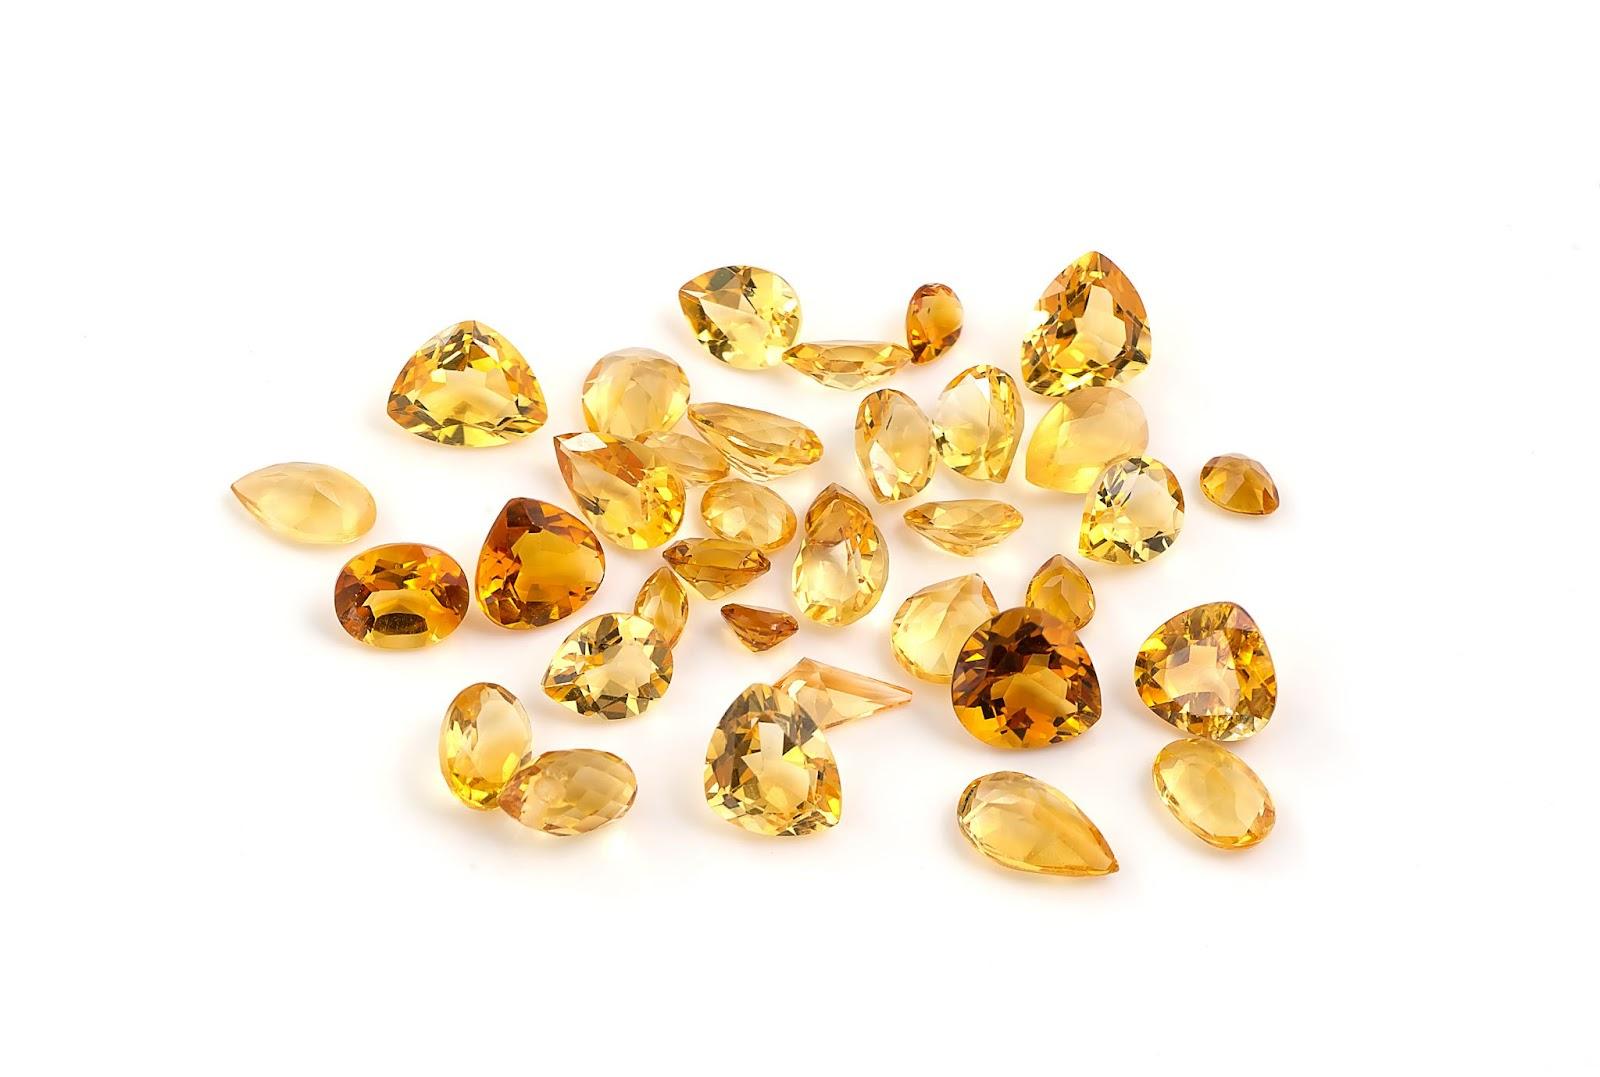 A collection of citrine in different cuts against a white background